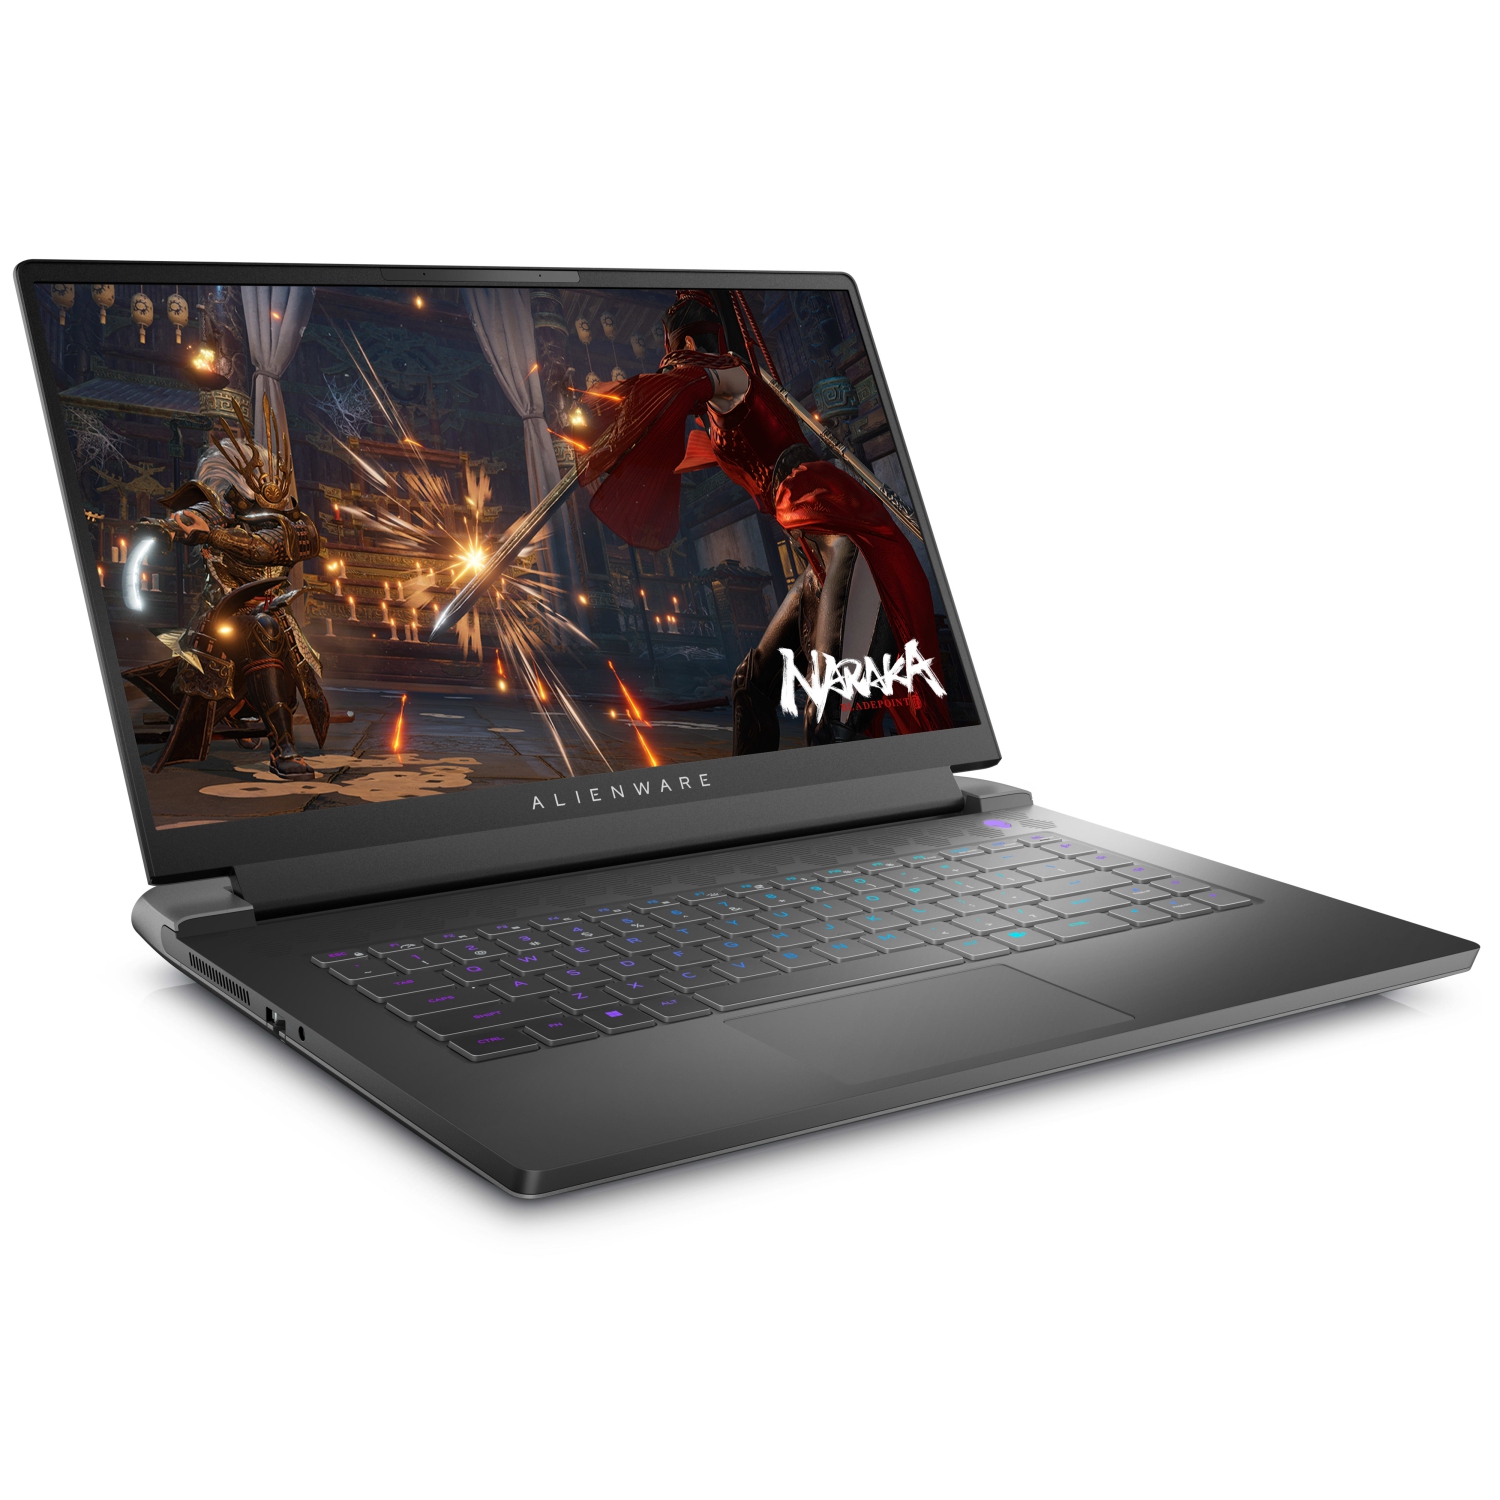 Refurbished (Excellent) – Dell Alienware m15 R7 Gaming Laptop (2022) | 15.6" FHD | Core i9 - 1TB SSD - 16GB RAM - 3070 Ti | 14 Cores @ 5 GHz - 12th Gen CPU - 8GB GDDR6X